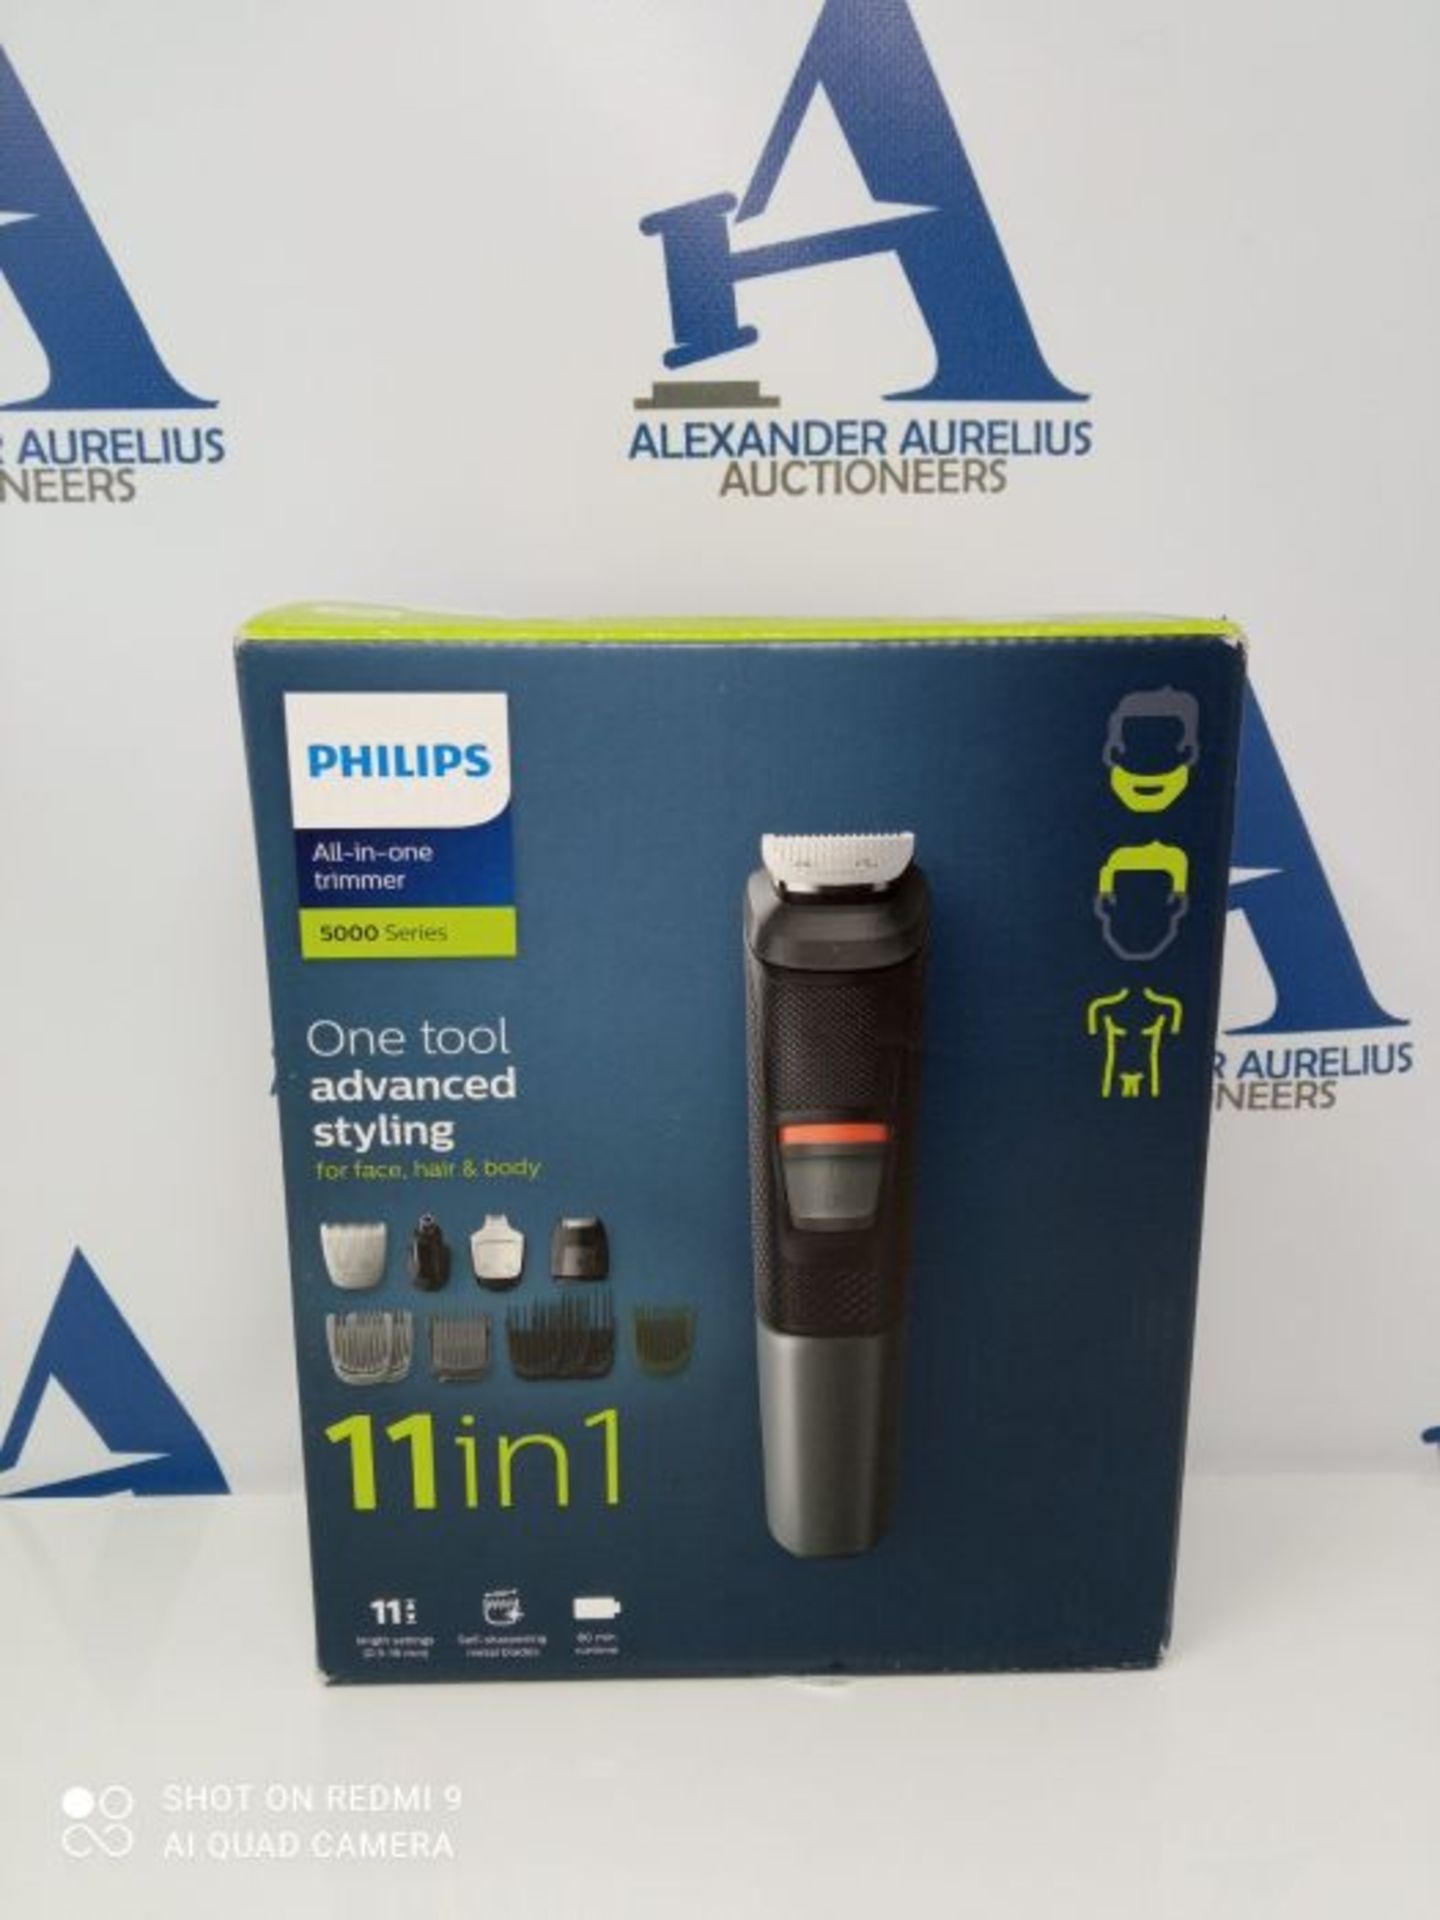 Philips Grooming Kit 5000 Series MG5730/15 Hair Clipper, Beard Trimmer, Body/Nose/Ears - Image 2 of 3